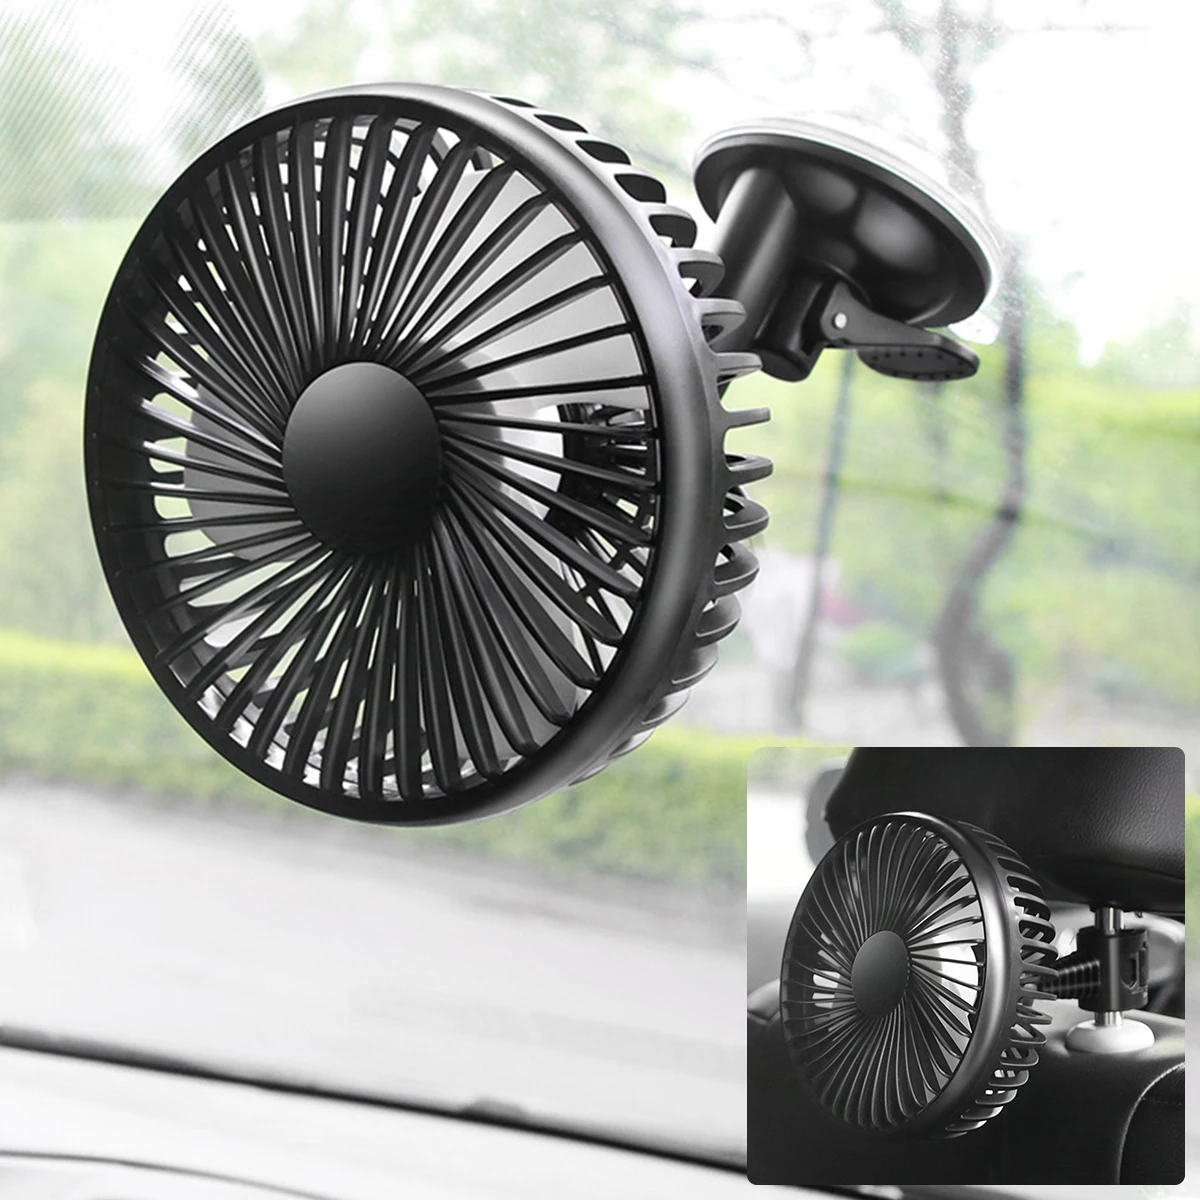 

5V USB Car Fan 360° Rotatable Adjustable USB Powered 3 Speeds Electric Car Central Console Cooling Fan for Car Truck Silence Fan